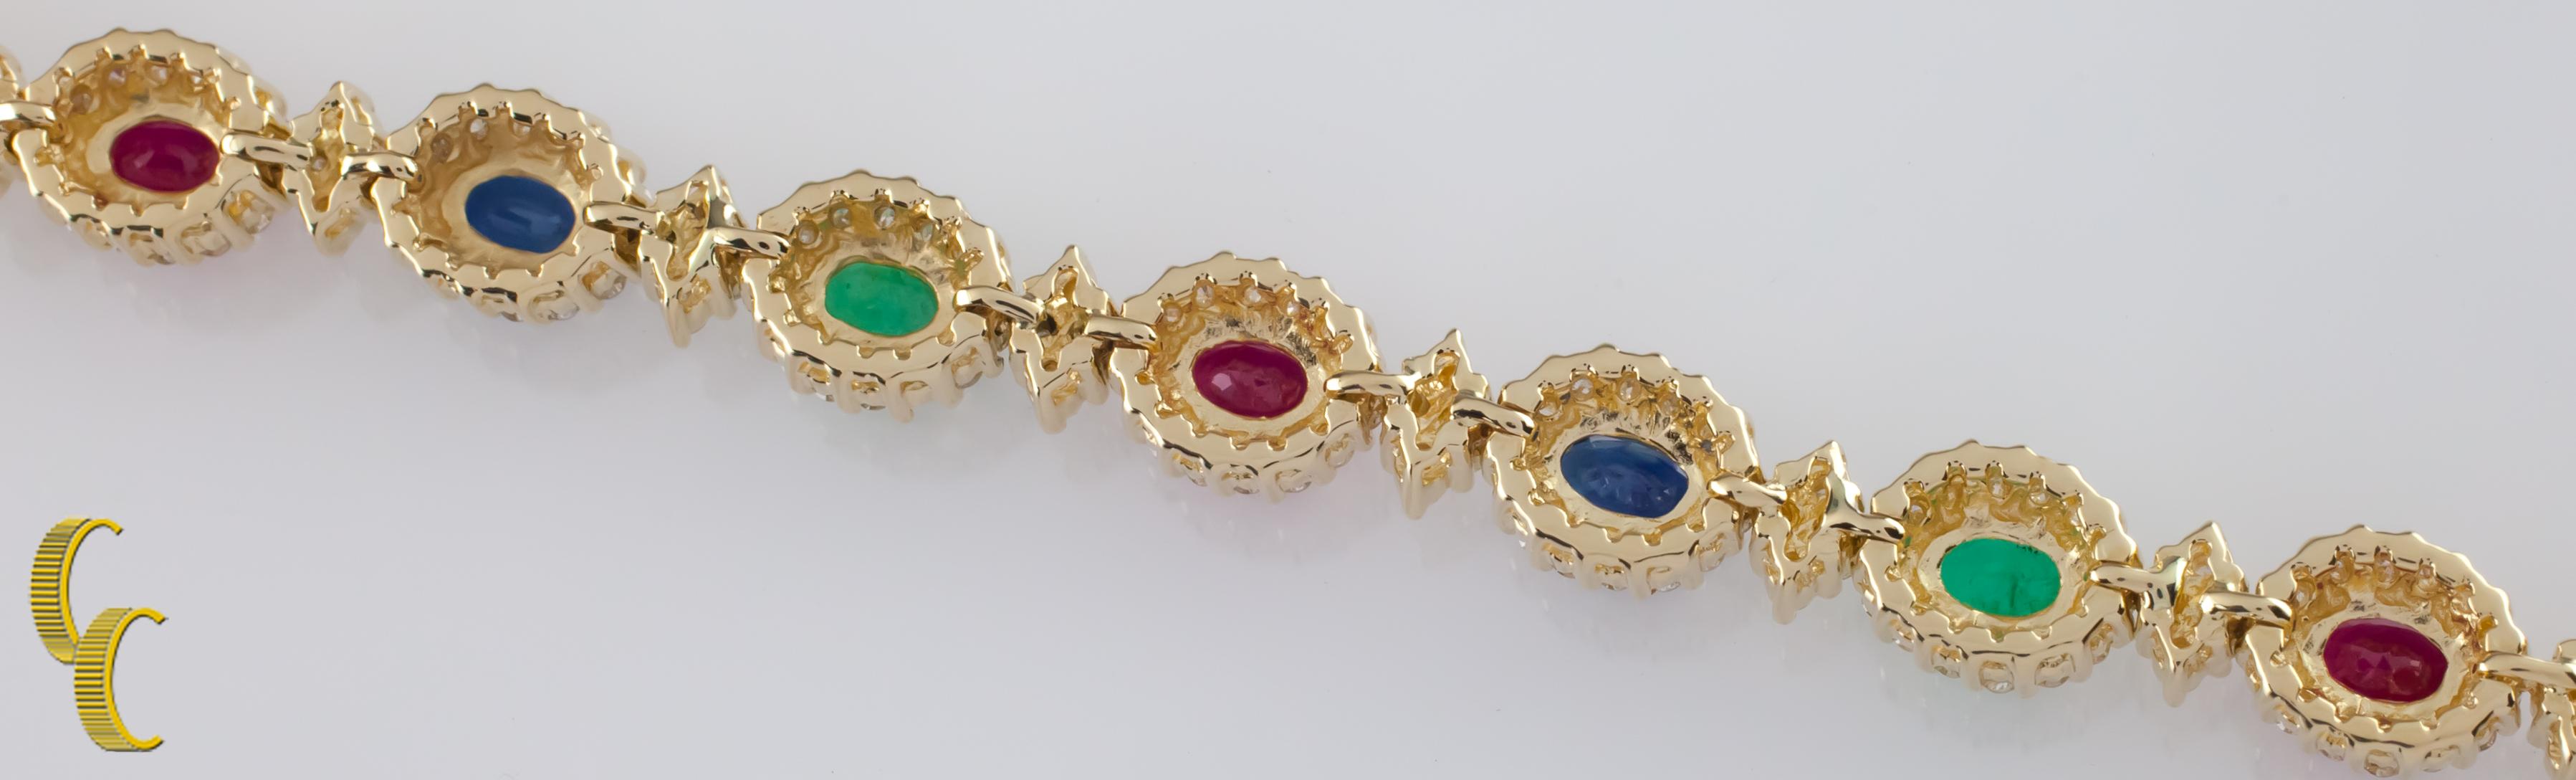 Gorgeous 14k Yellow Gold Station Bracelet
Features oval-cut prong-set emeralds, rubies, and sapphires set in diamond halo settings
Each station is separated by a prong-set diamond quatrefoil
Length of one station = 9 mm
Width of one station = 7